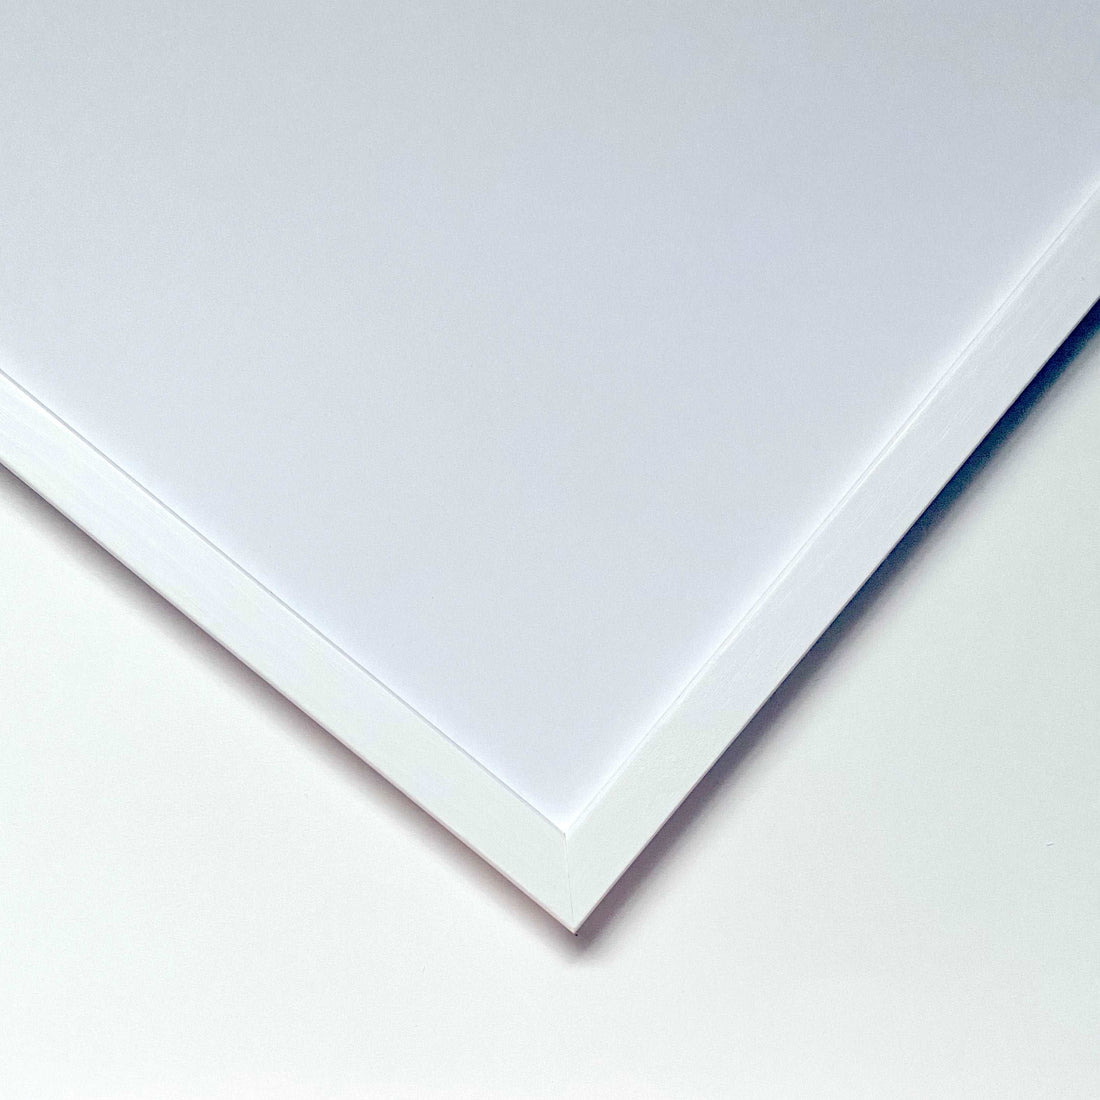 Frame A3 White - Add sophistication to your posters